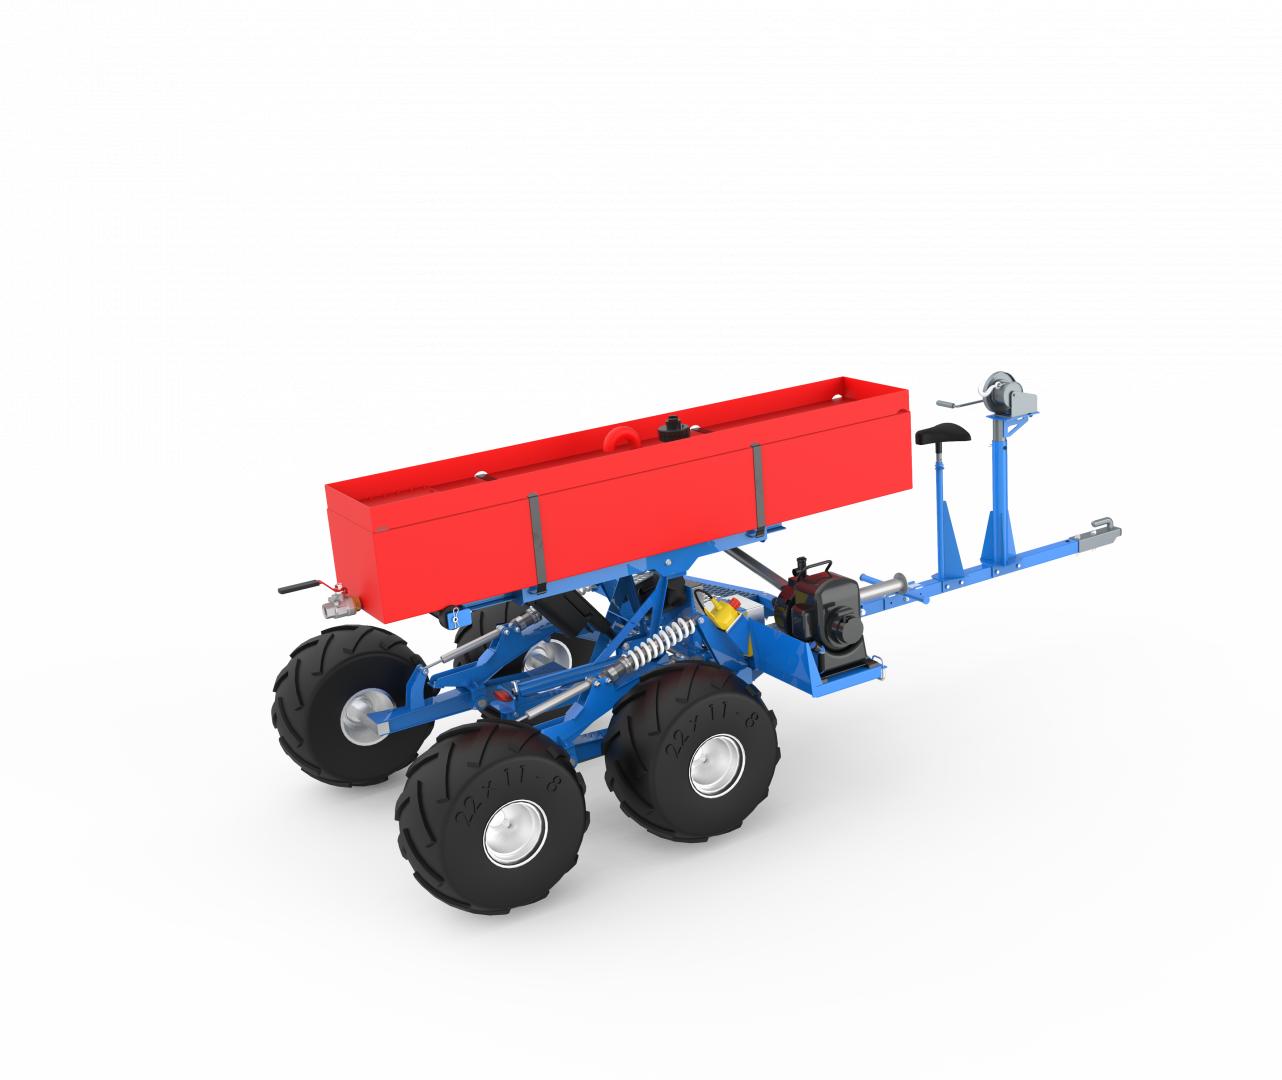 Self leveling rescue vehicle With 200 L water tank to put down small fires in rough terrain